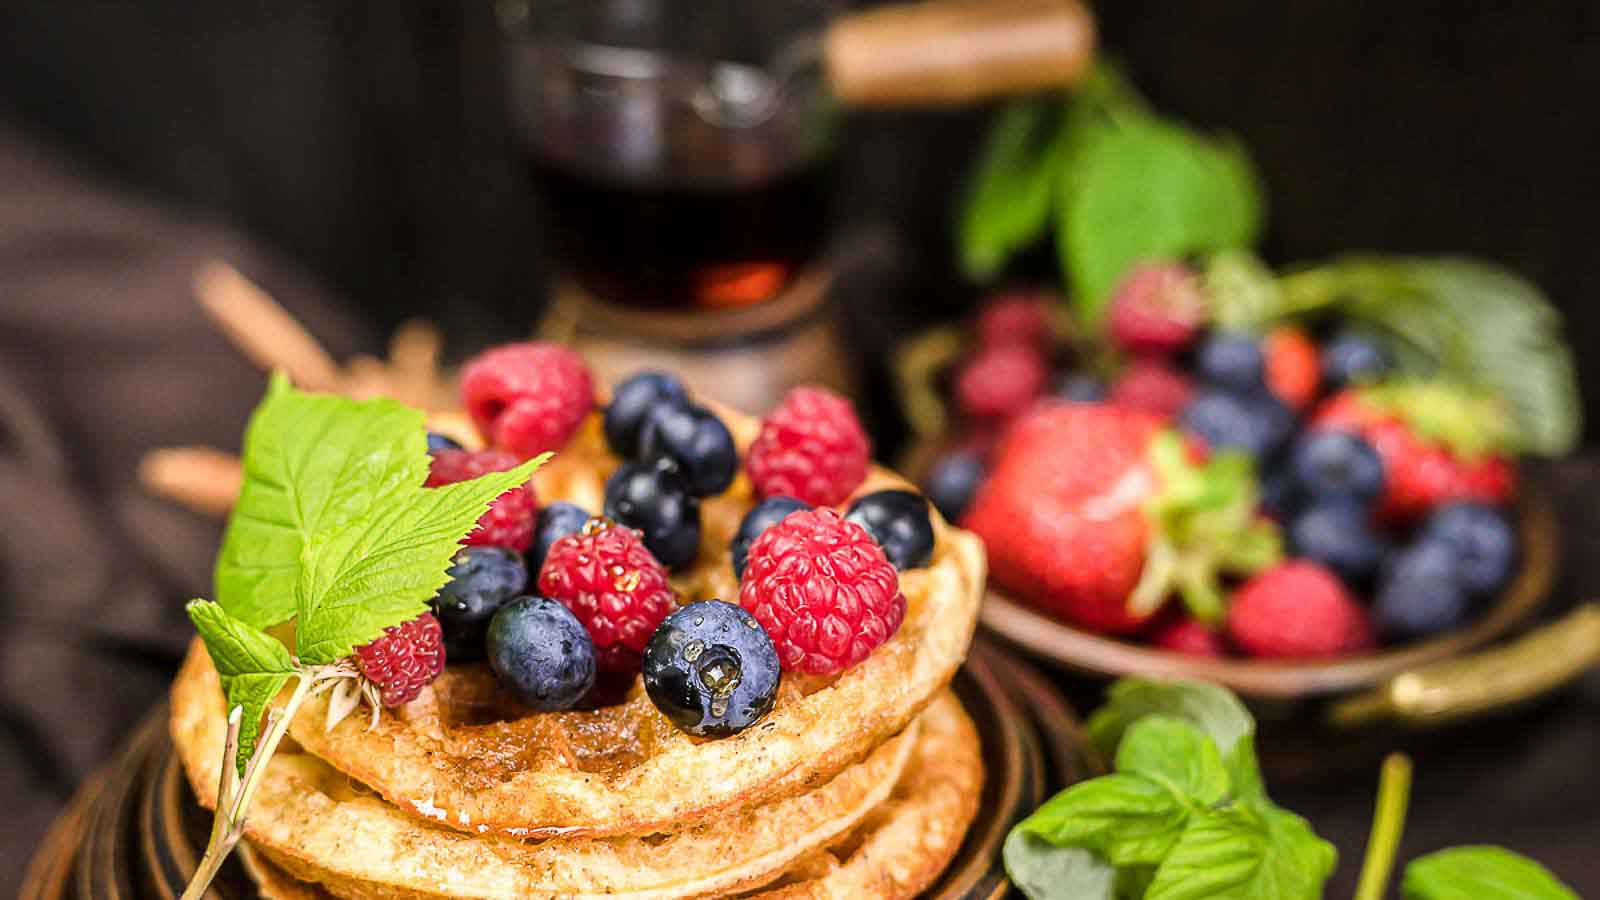 Chaffles on a plate with berries.